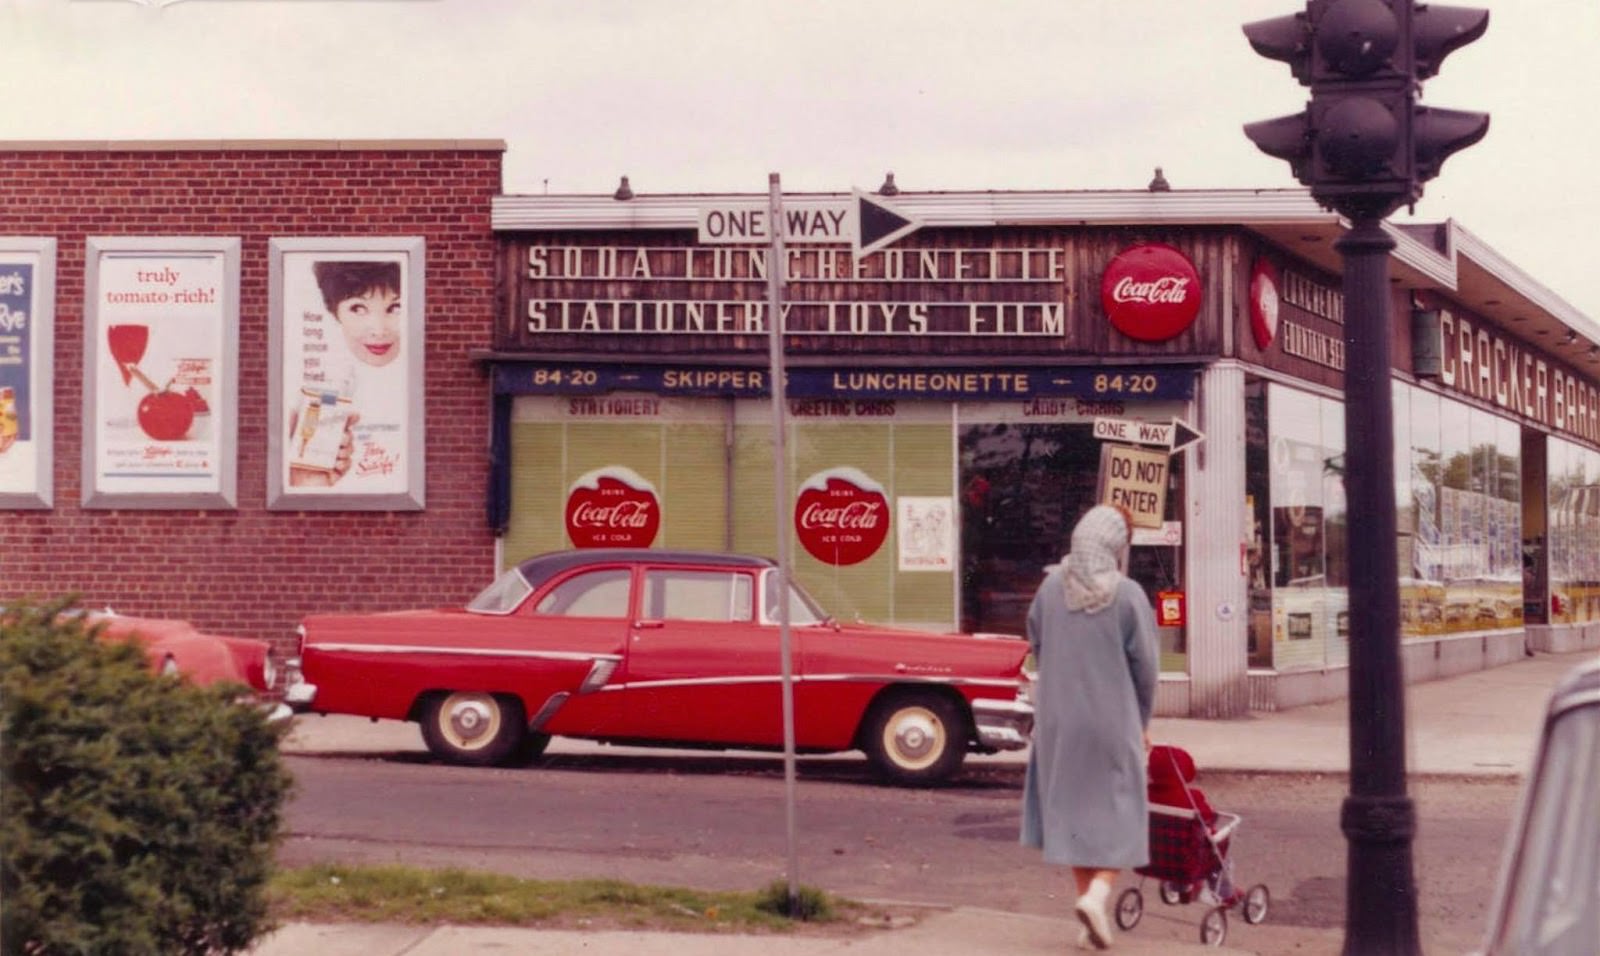 Astoria Boulevard and 85th Street, East Elmhurst, Queens, May 1961.